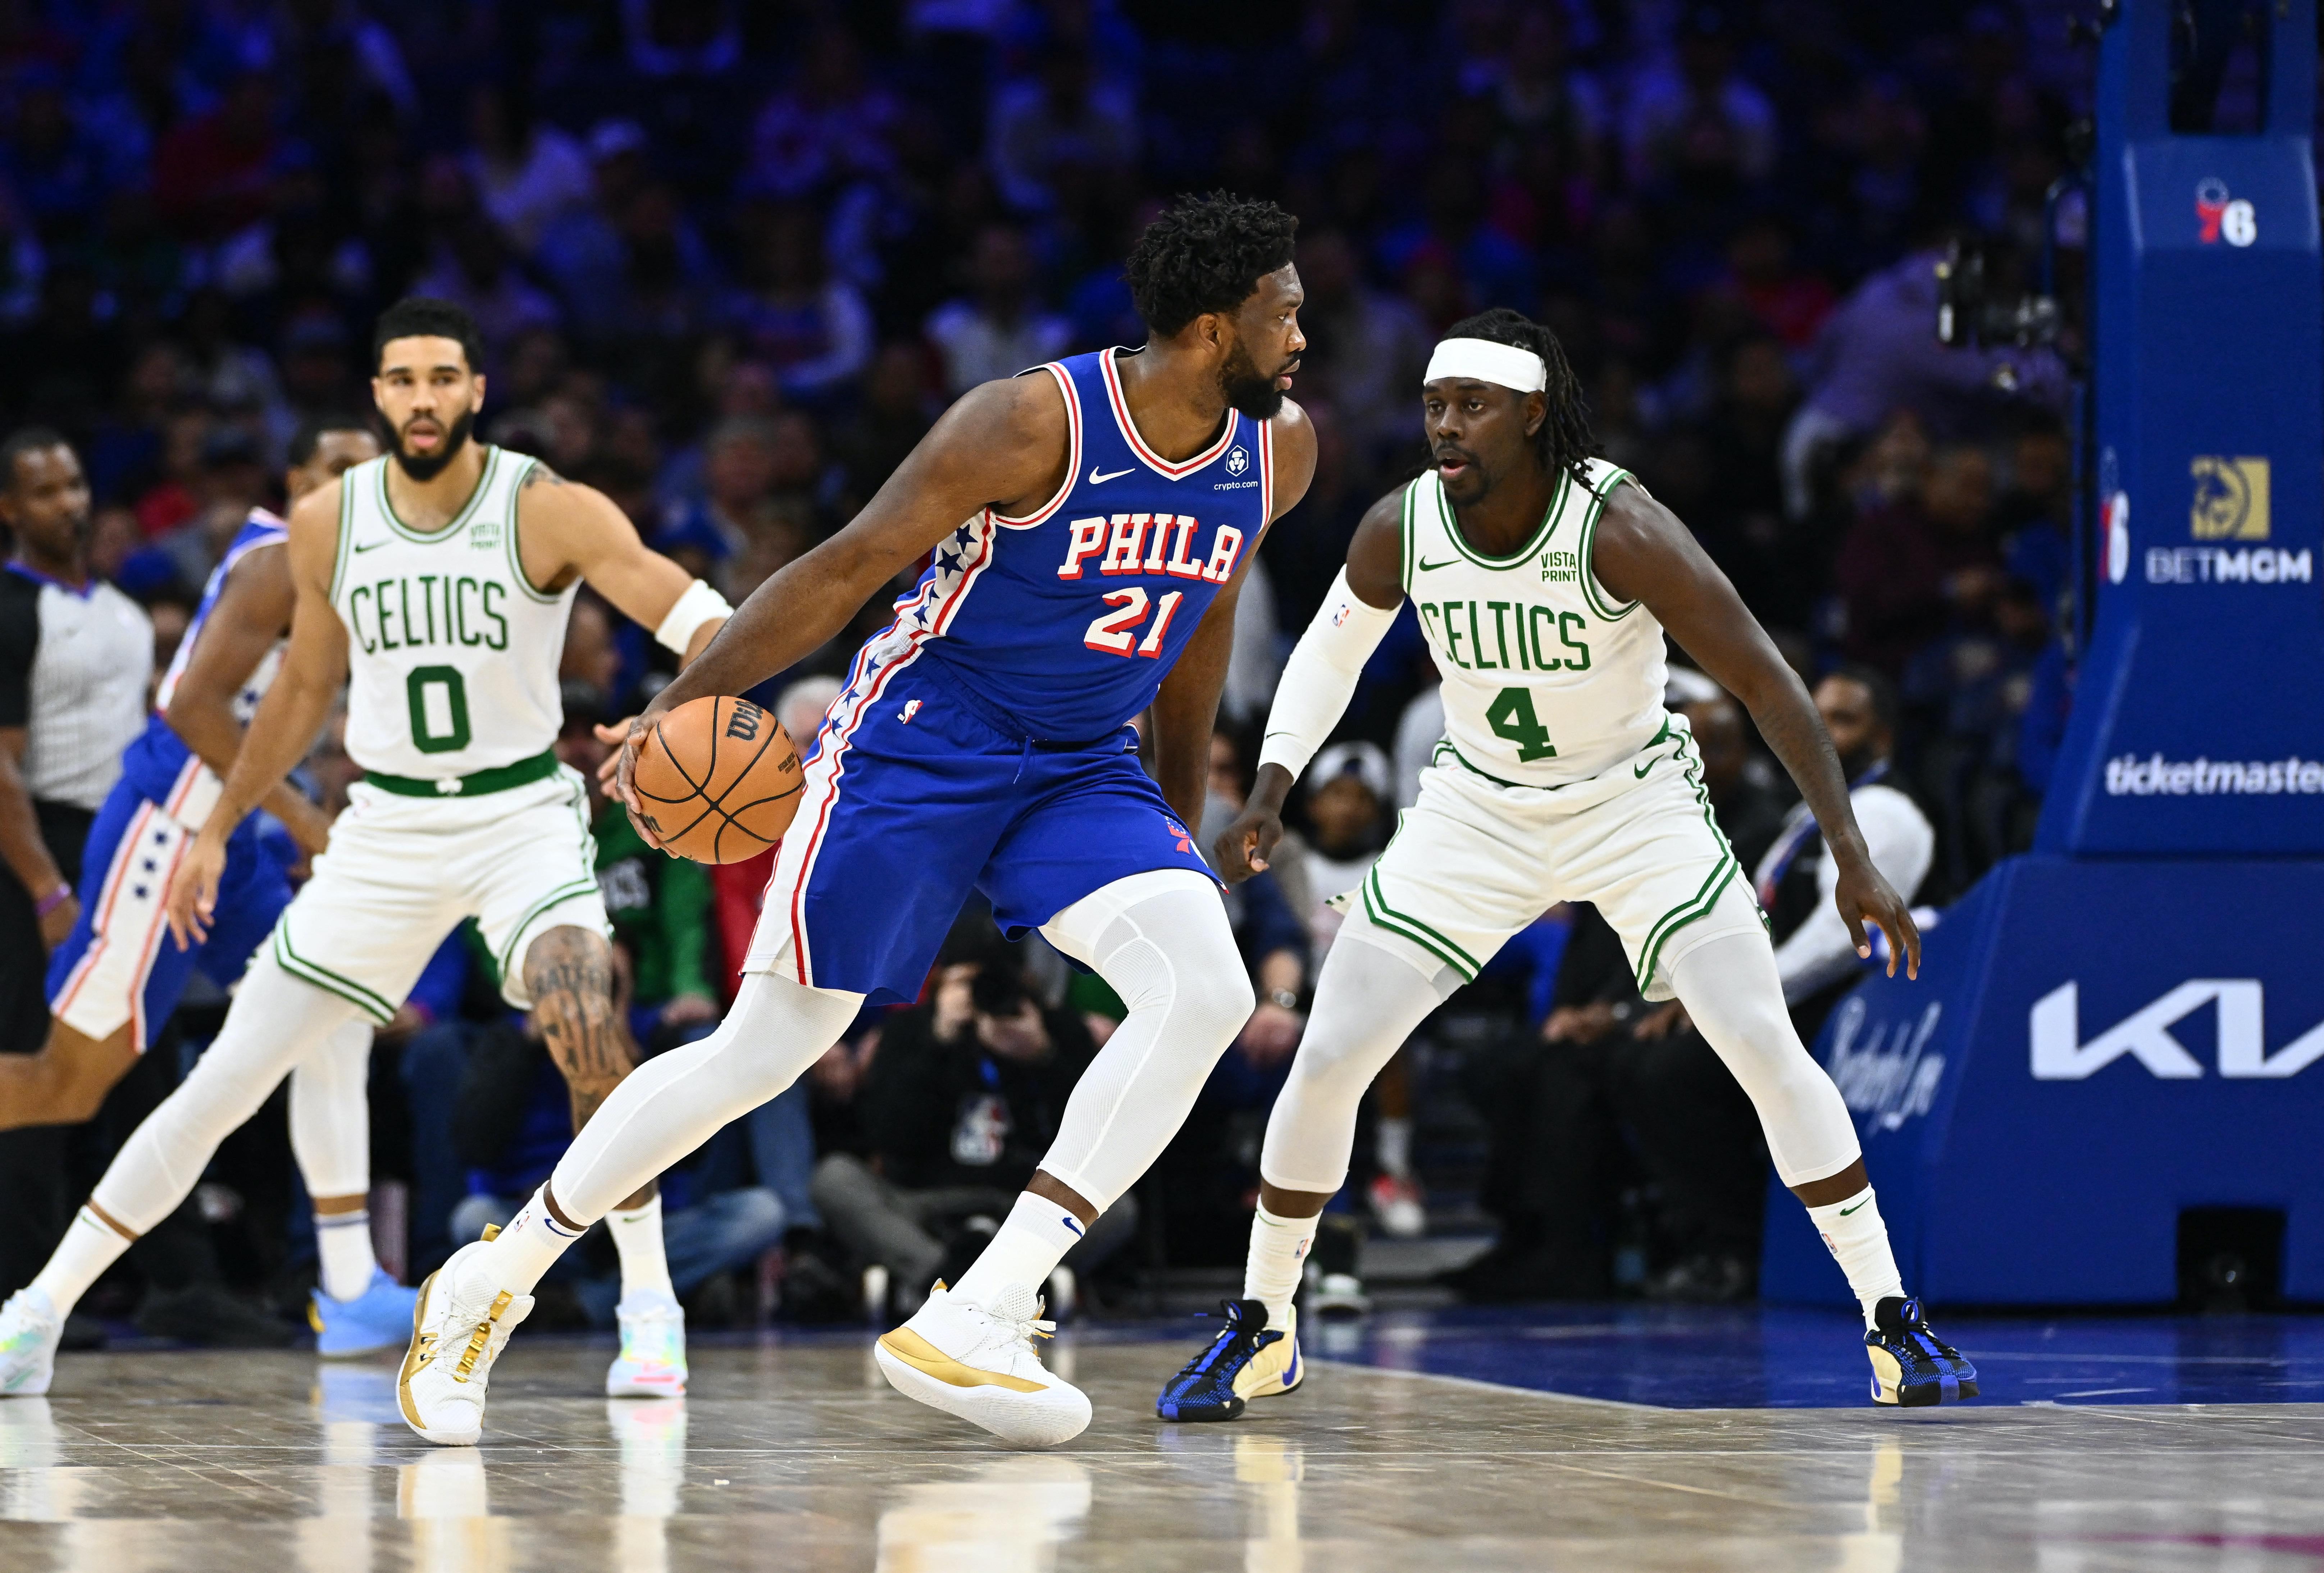 NBA: 76ers hold off Celtics, win 6th straight game